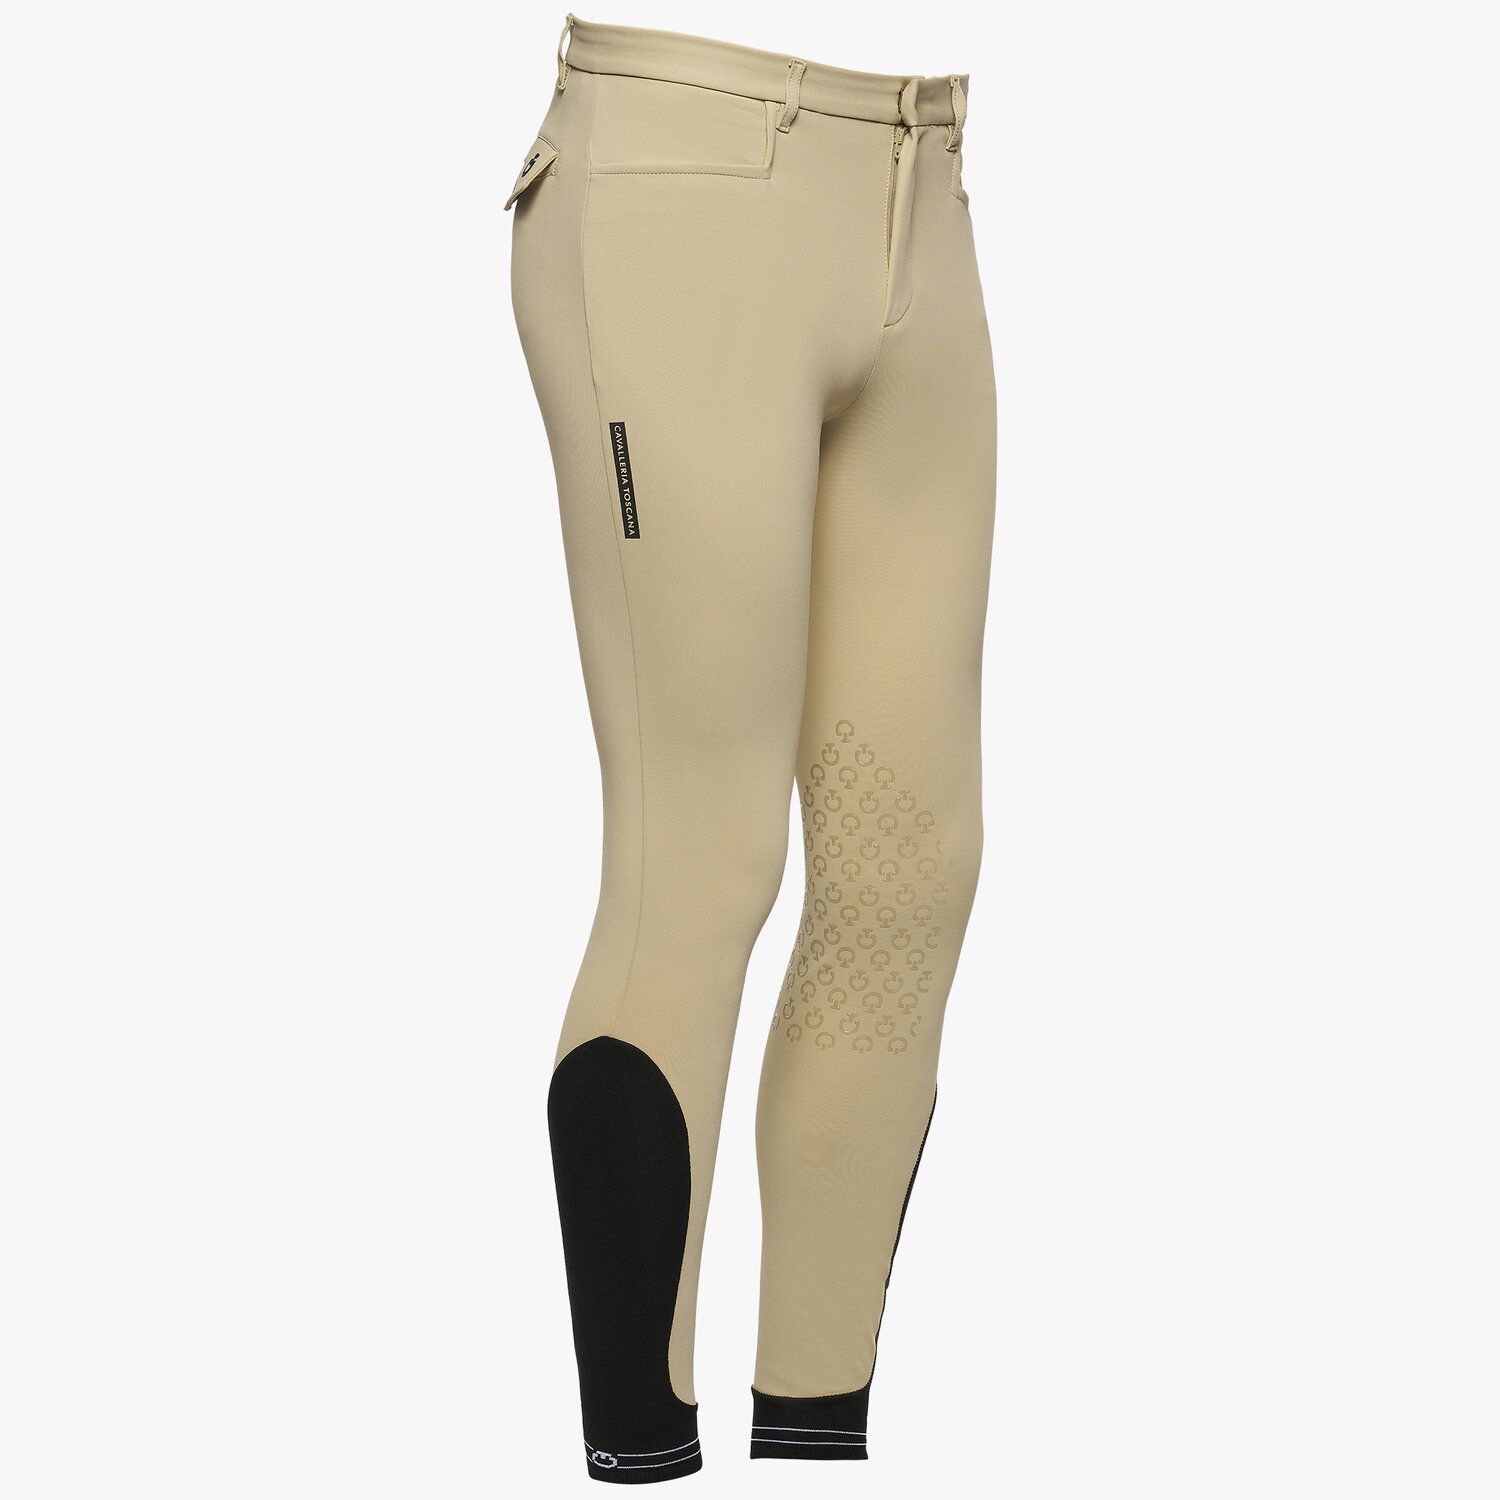 Men's knee grip breeches with perforated logo tape